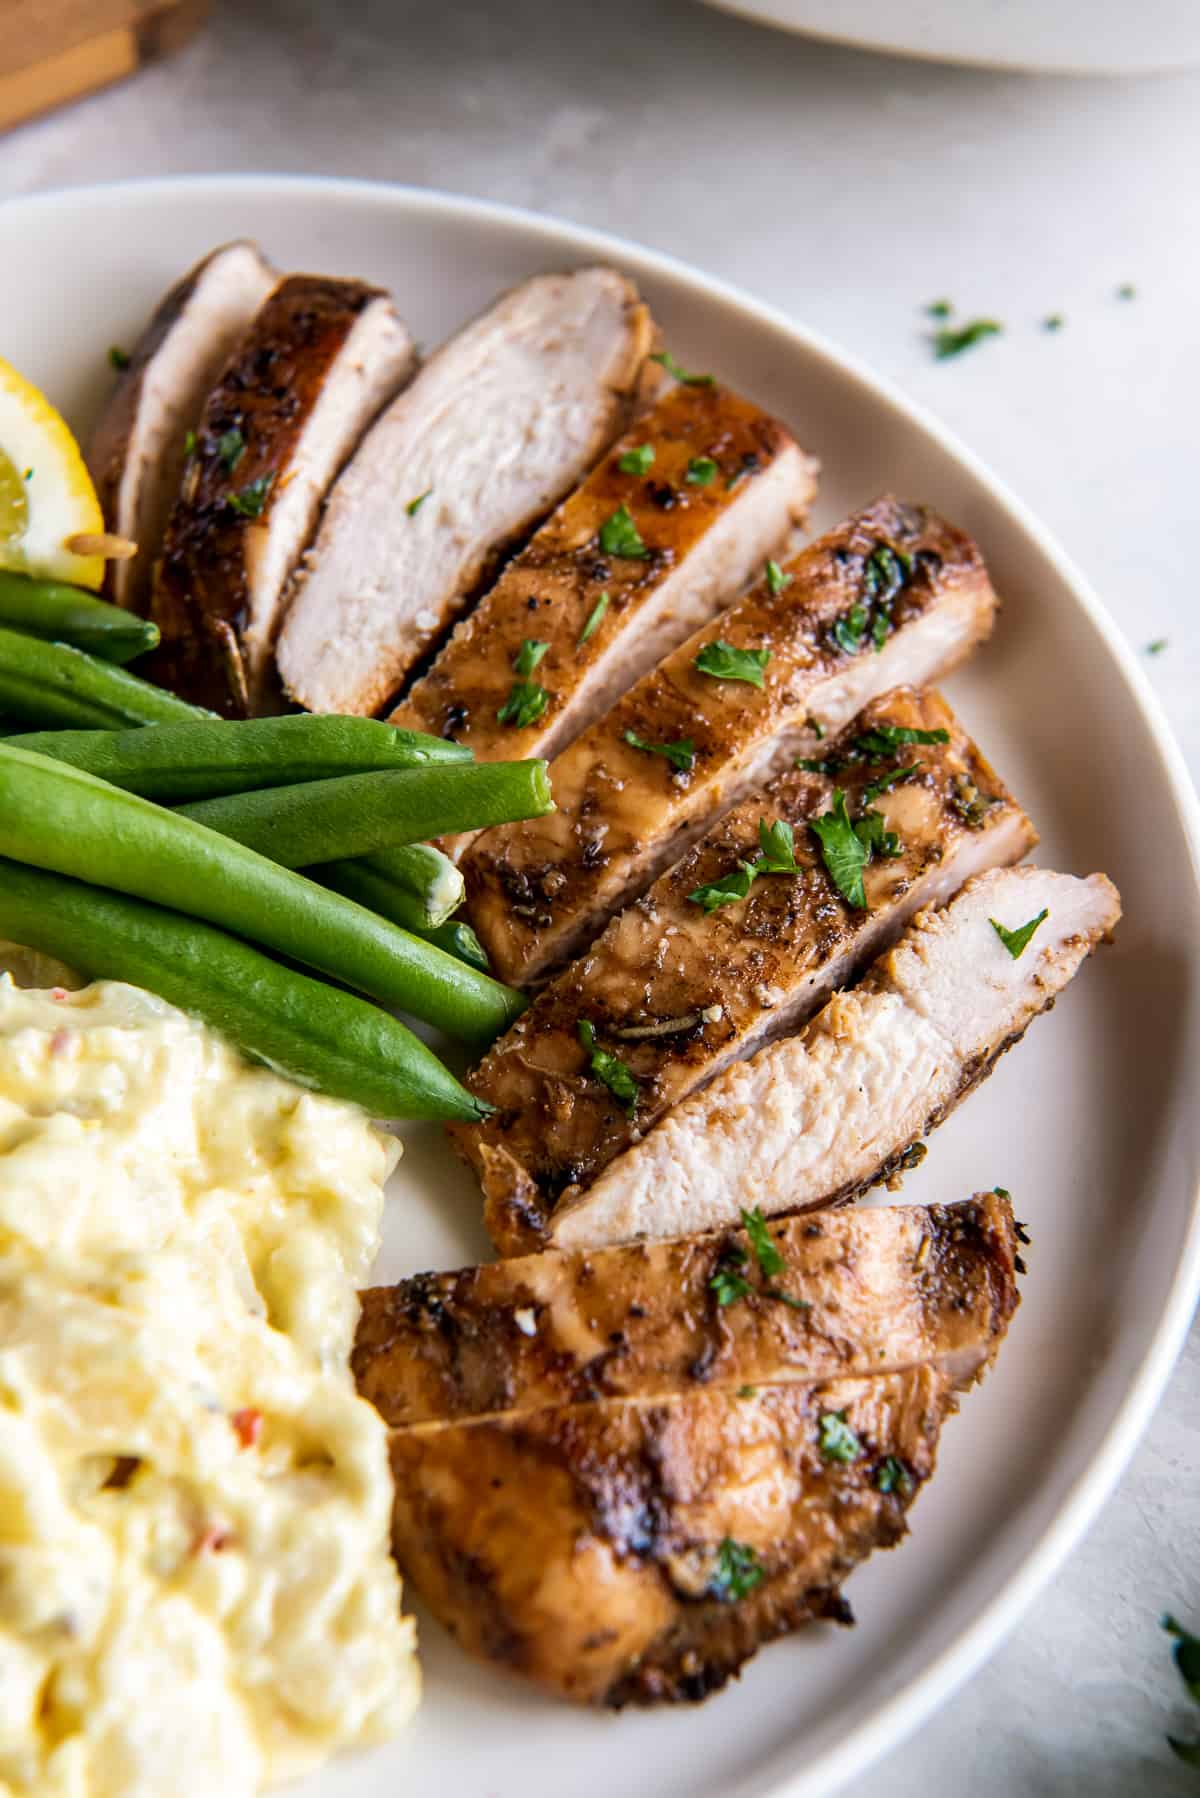 A sliced grilled chicken breast on a plate with potato salad and green beans.